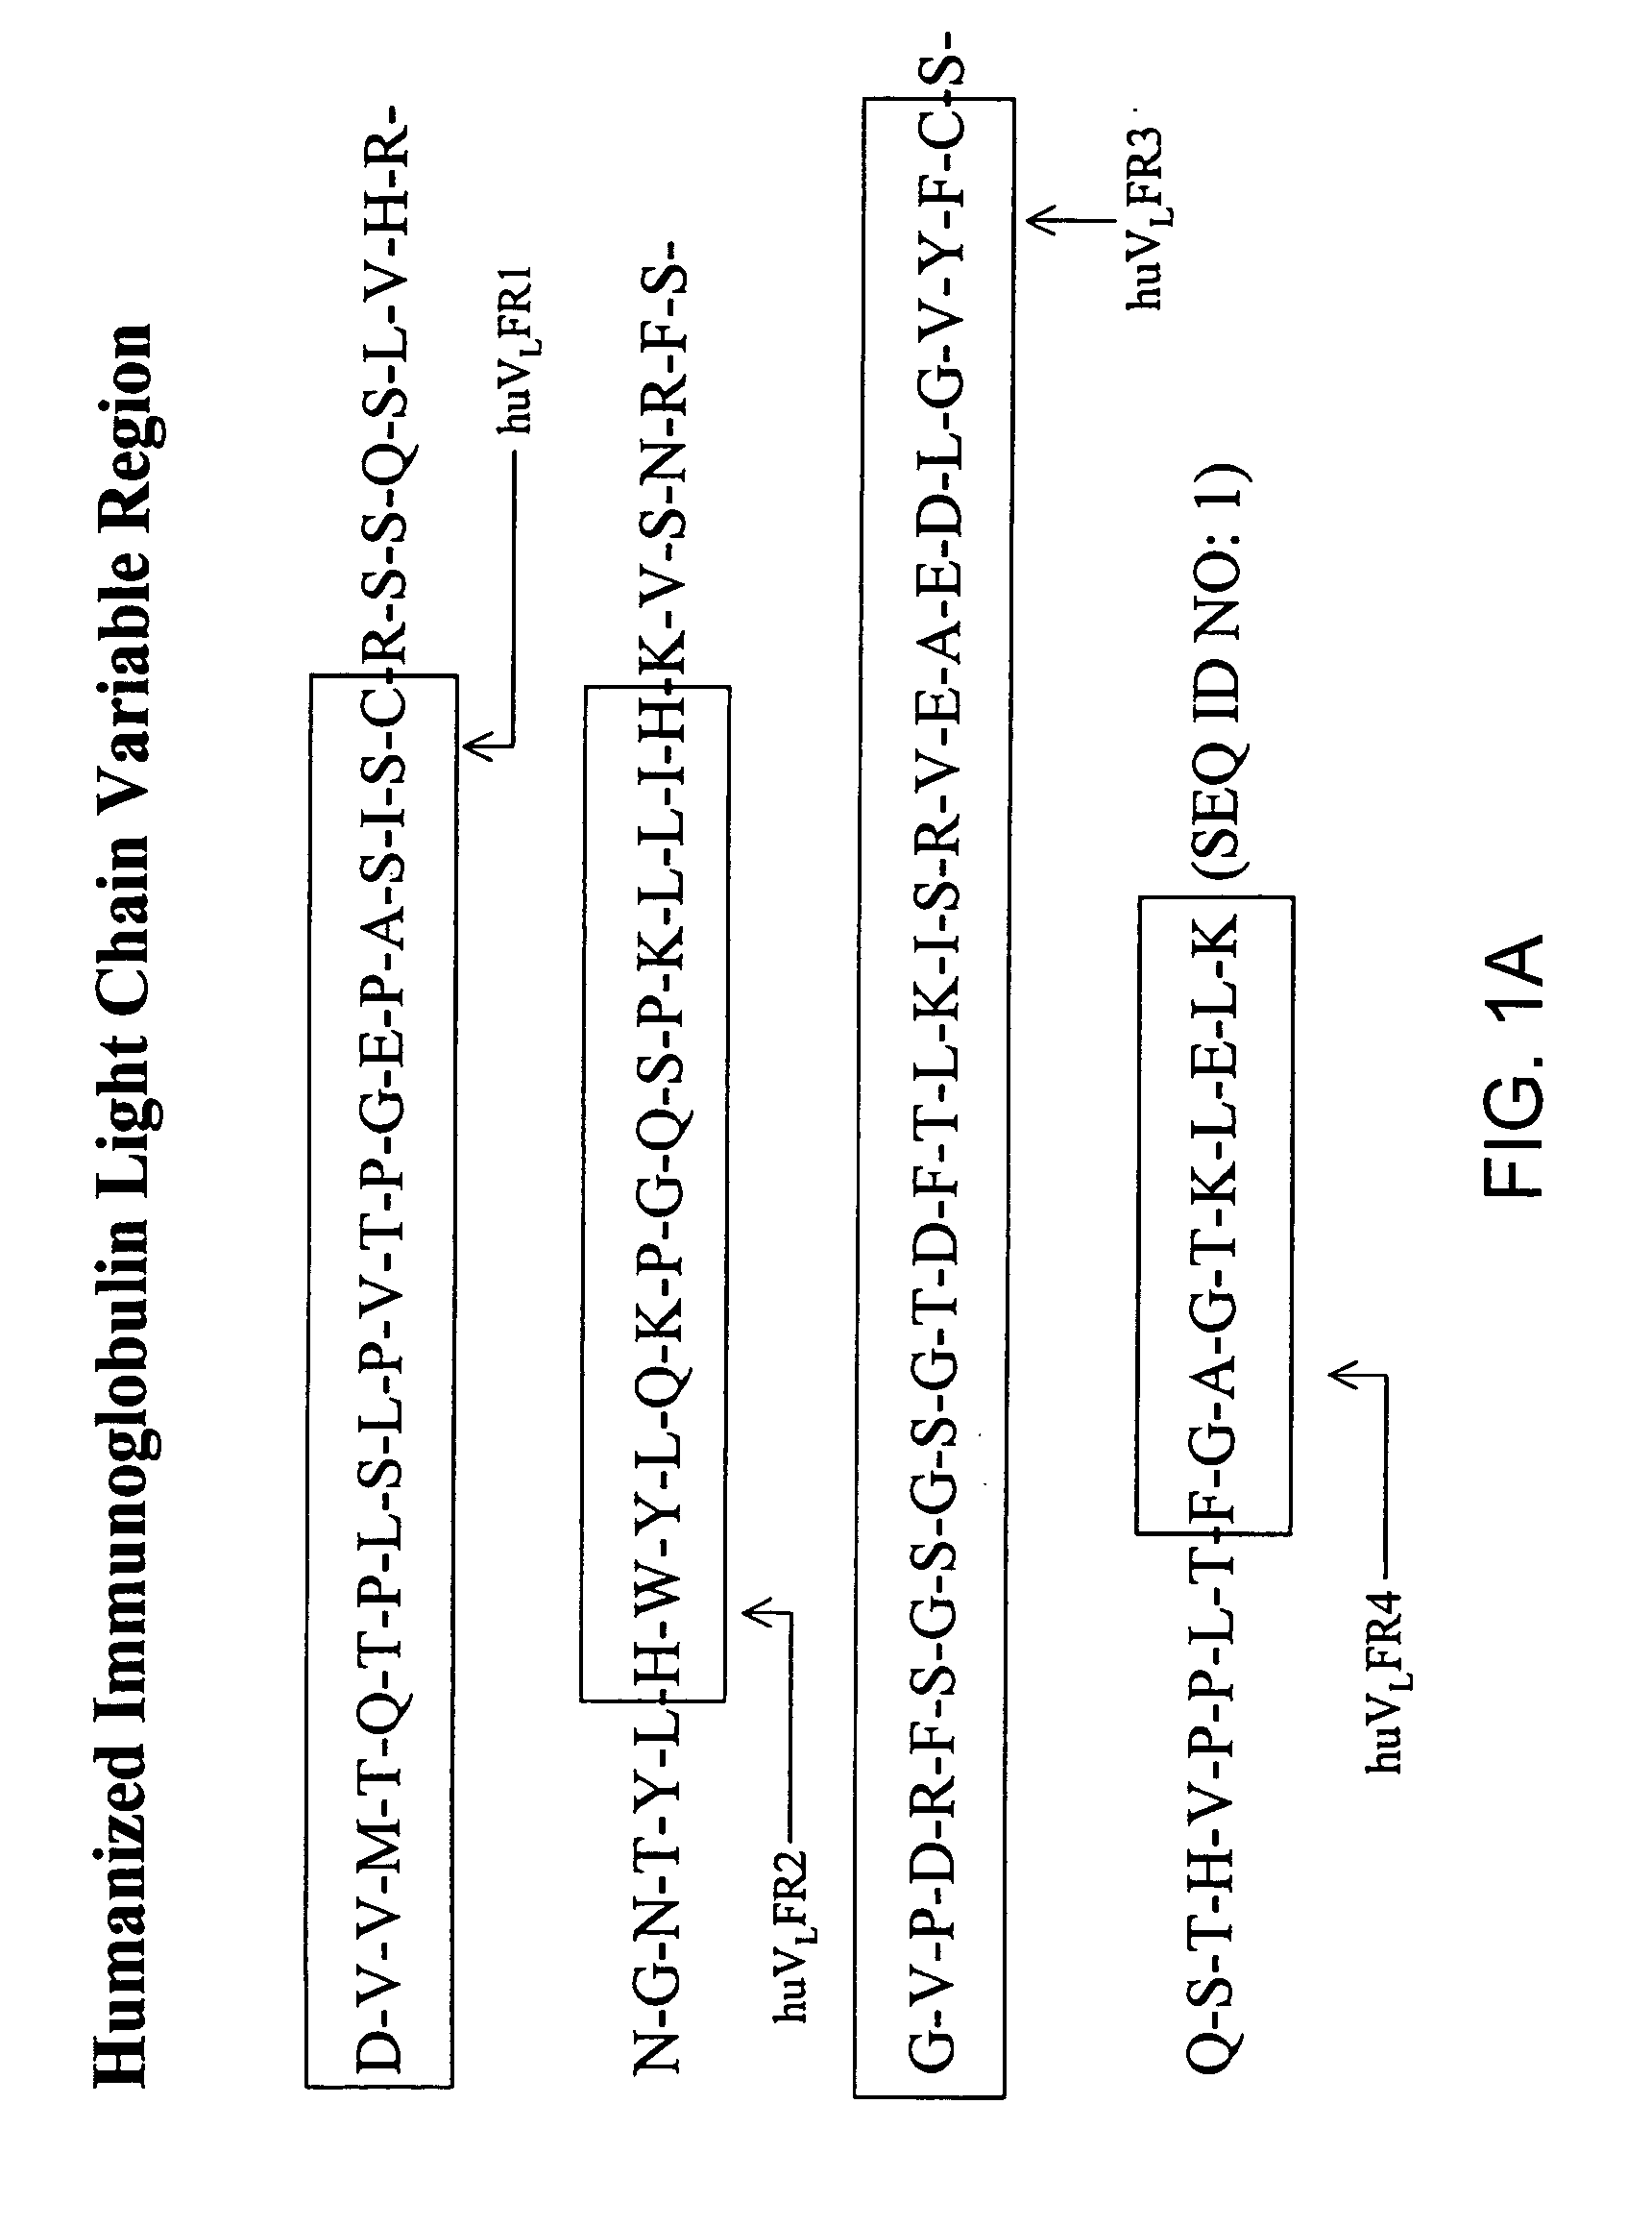 Immunocytokine sequences and uses thereof